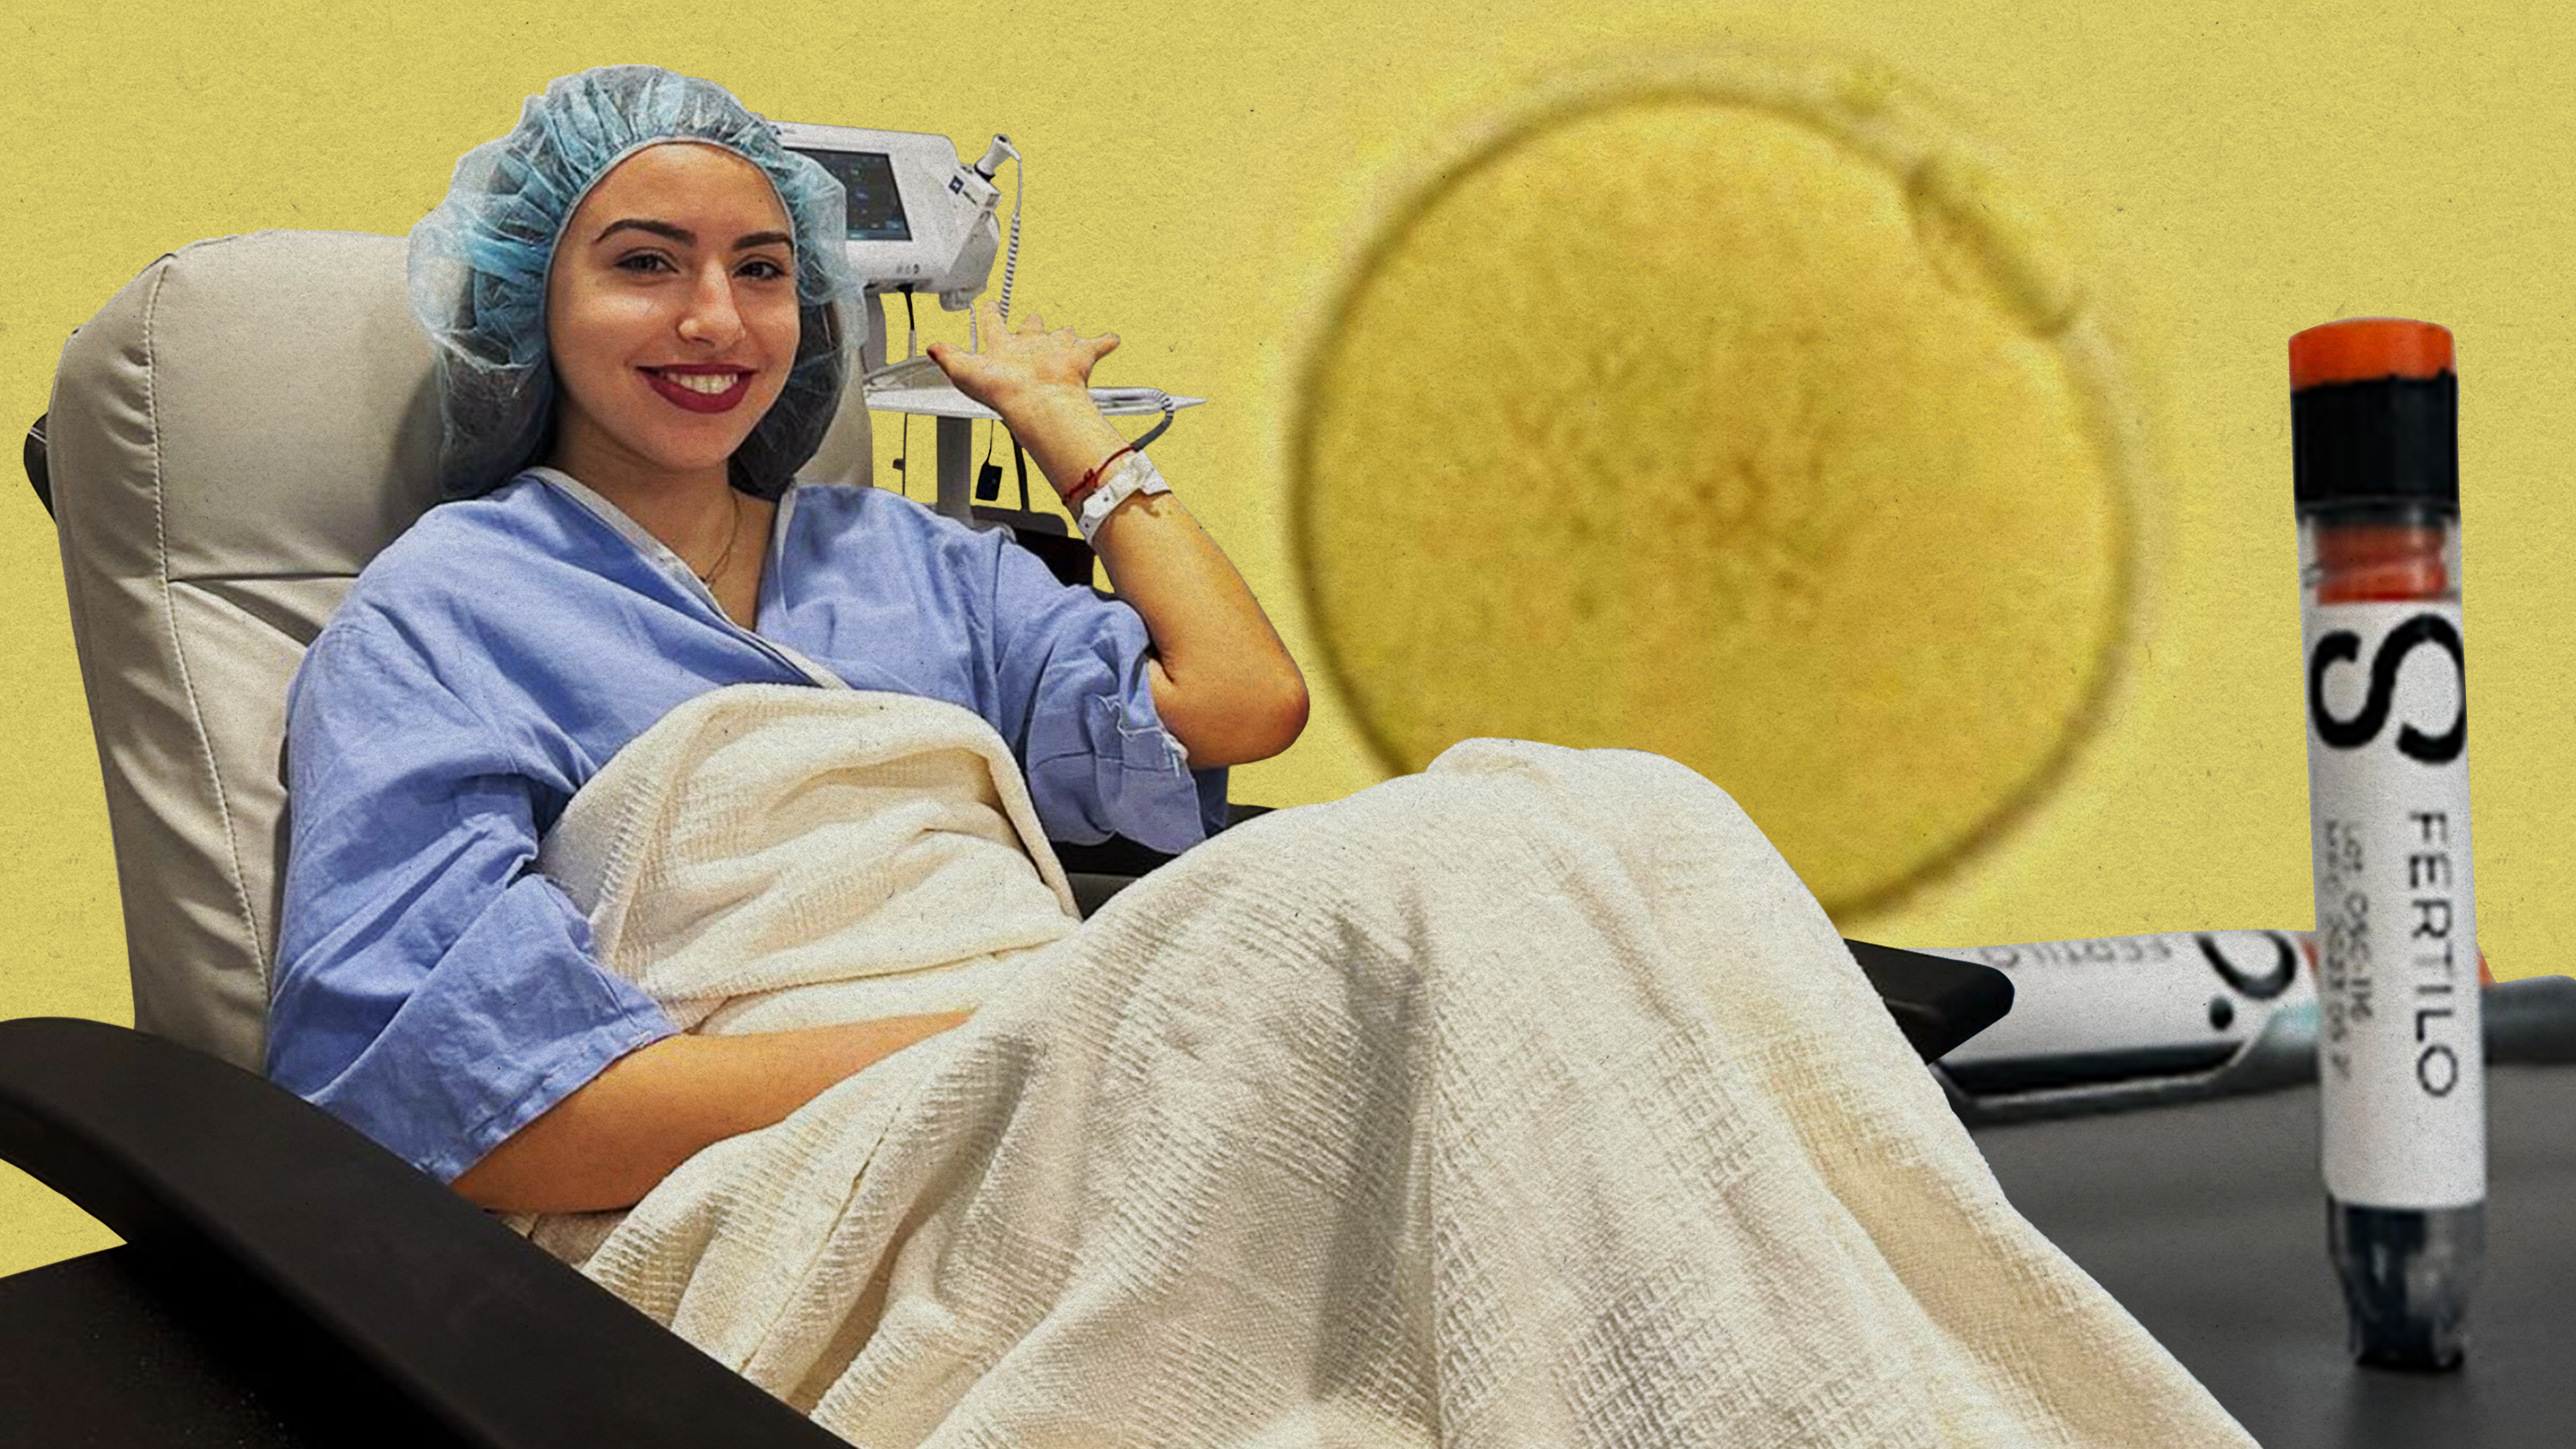 Photo illustration showing Dr. Dina Radenkovic waving during egg retrieval treatment, with a mature egg and vile in the composition.